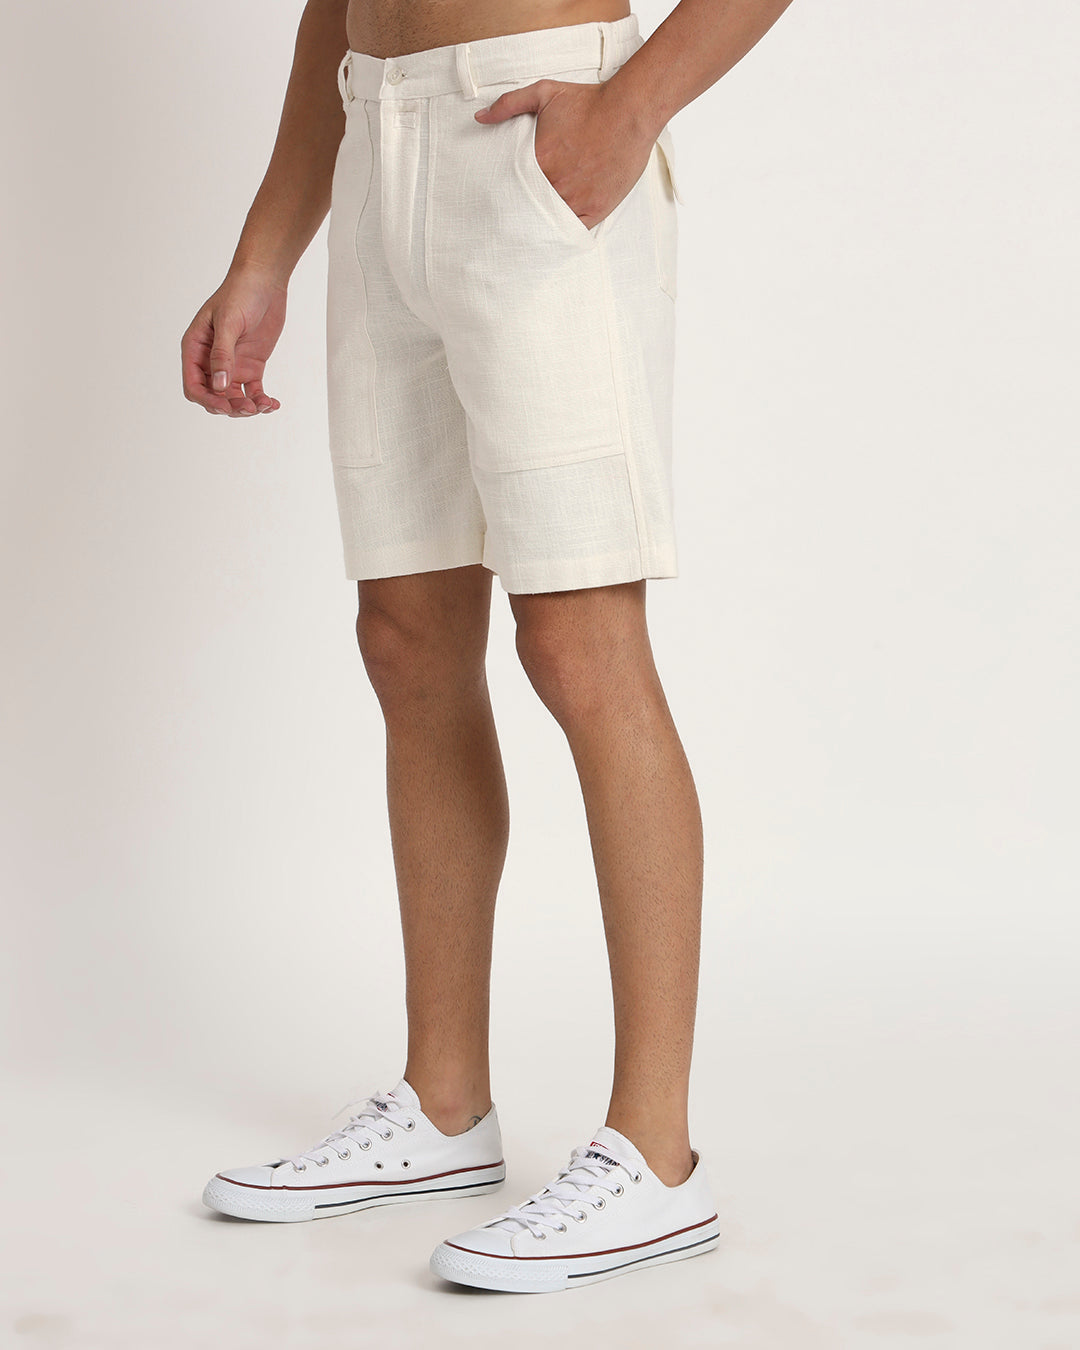 Combo : Patch Pocket Playtime White & Midnight Blue Men's Shorts